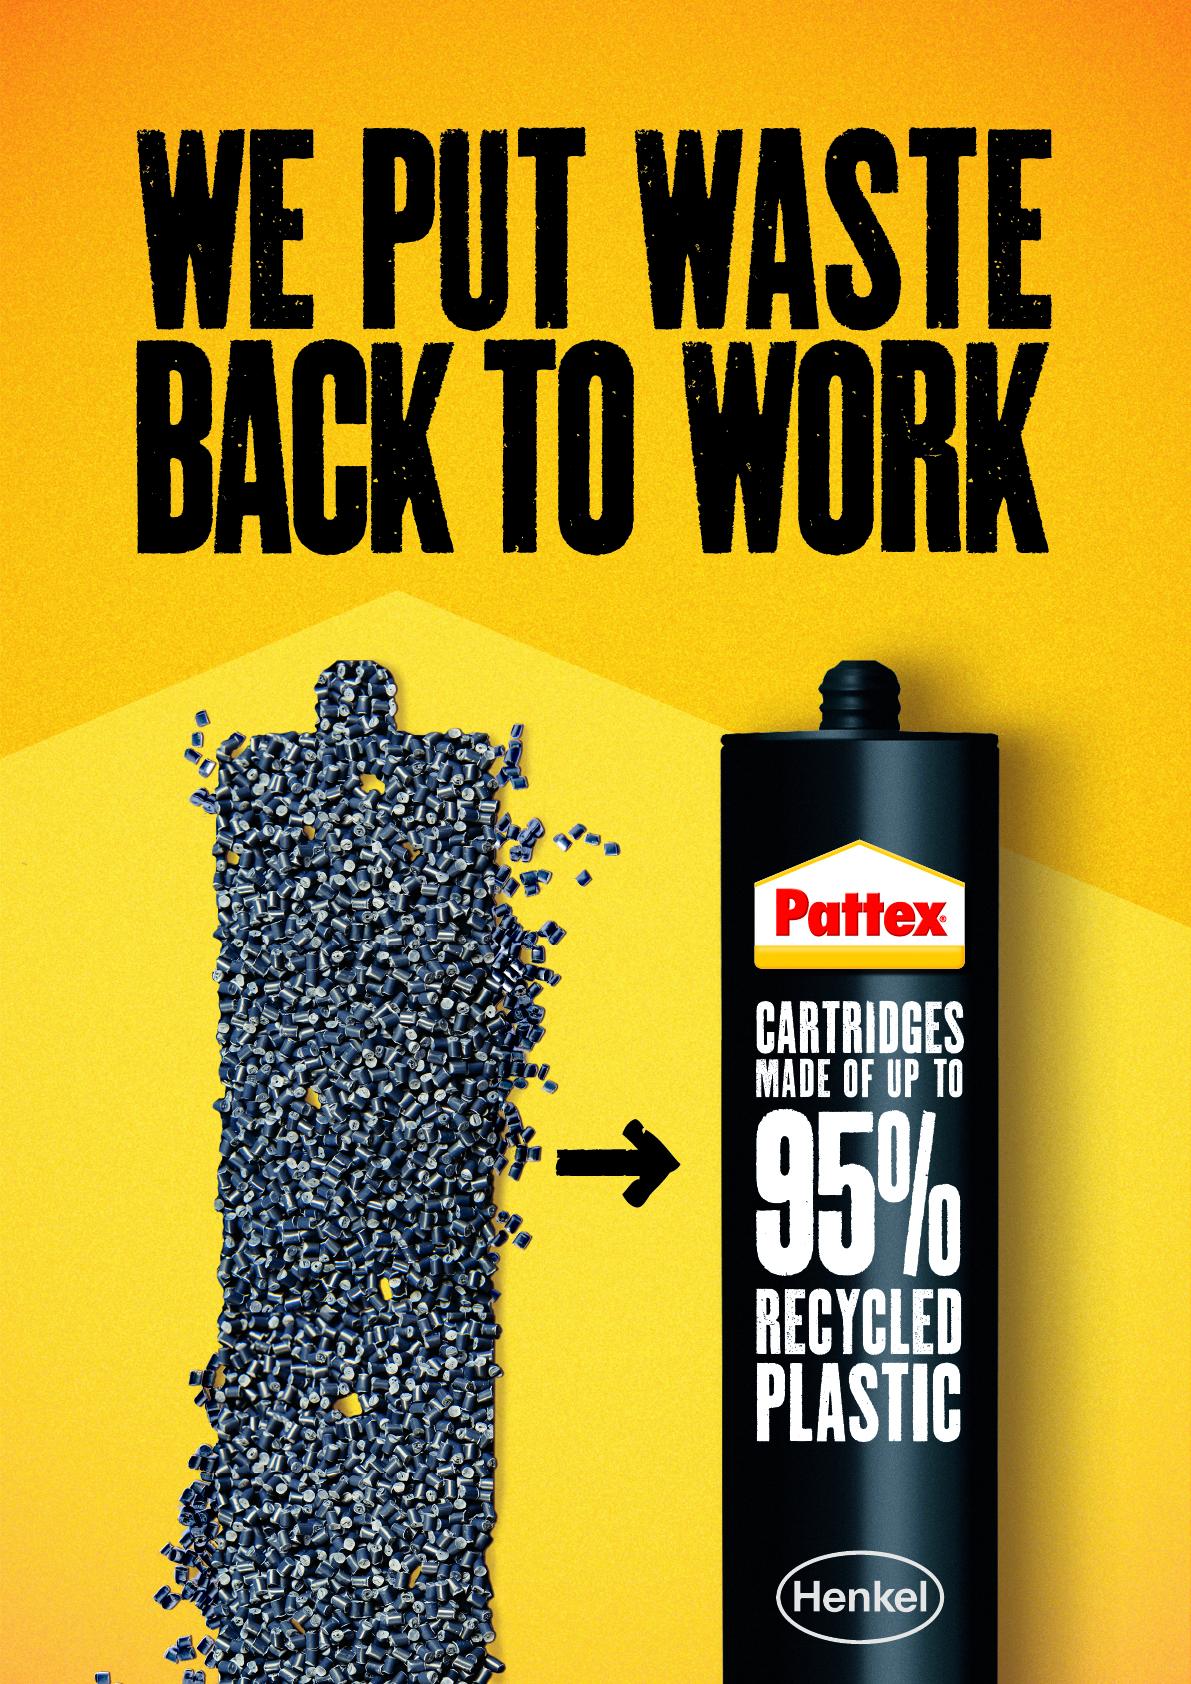 Image of a cartridge made up of 95% recycled plastic with the text "We put waste back to work" 